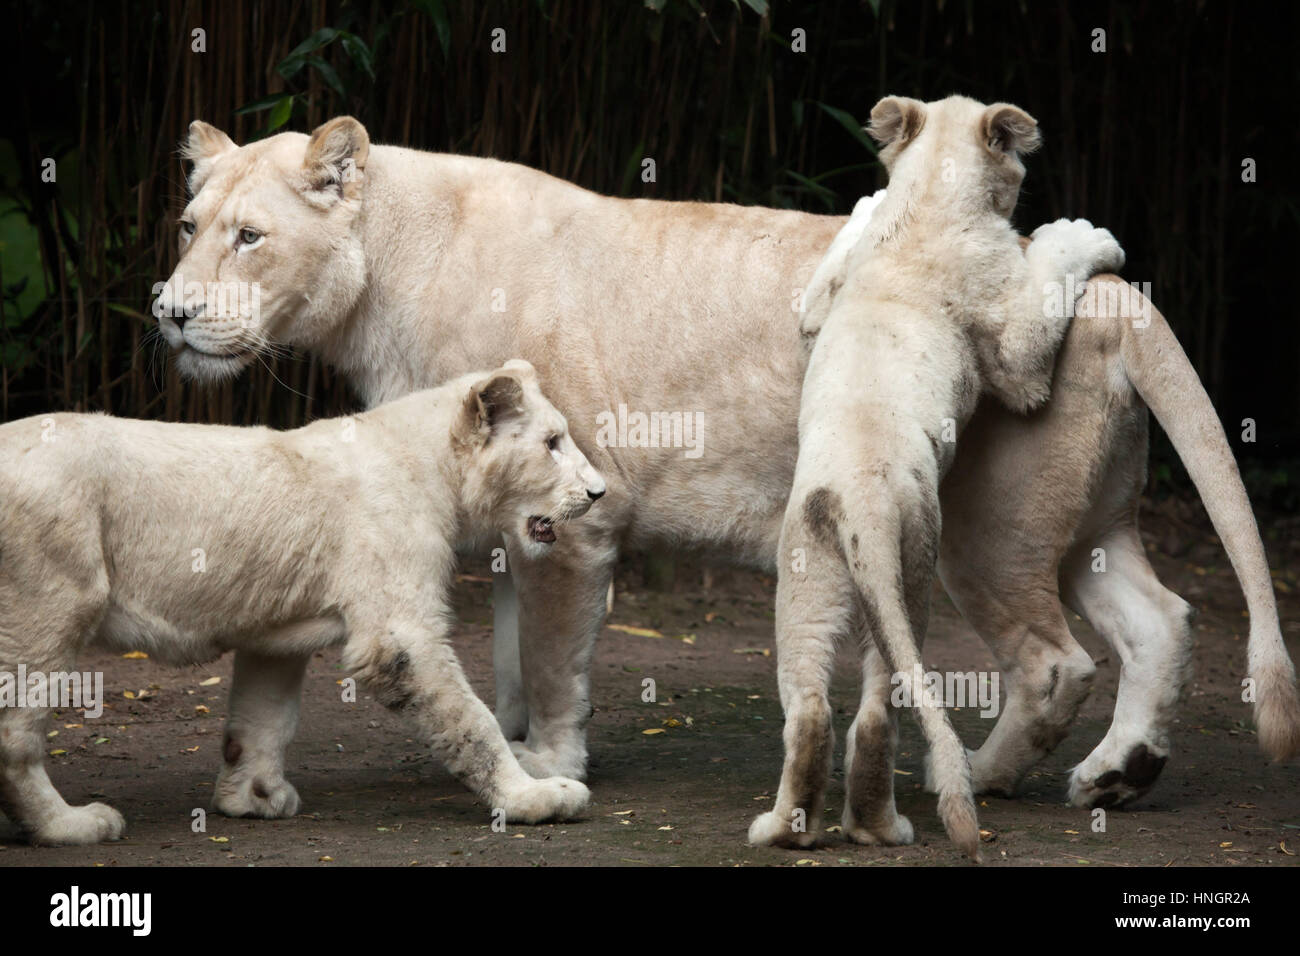 Female white lion with two newborn lion cubs at La Fleche Zoo in the Loire Valley, France. The white lion is a colour mutation of the Transvaal lion (Panthera leo krugeri), also known as the Southeast African lion or Kalahari lion. Two white lion cubs were born on December 2, 2015. Stock Photo